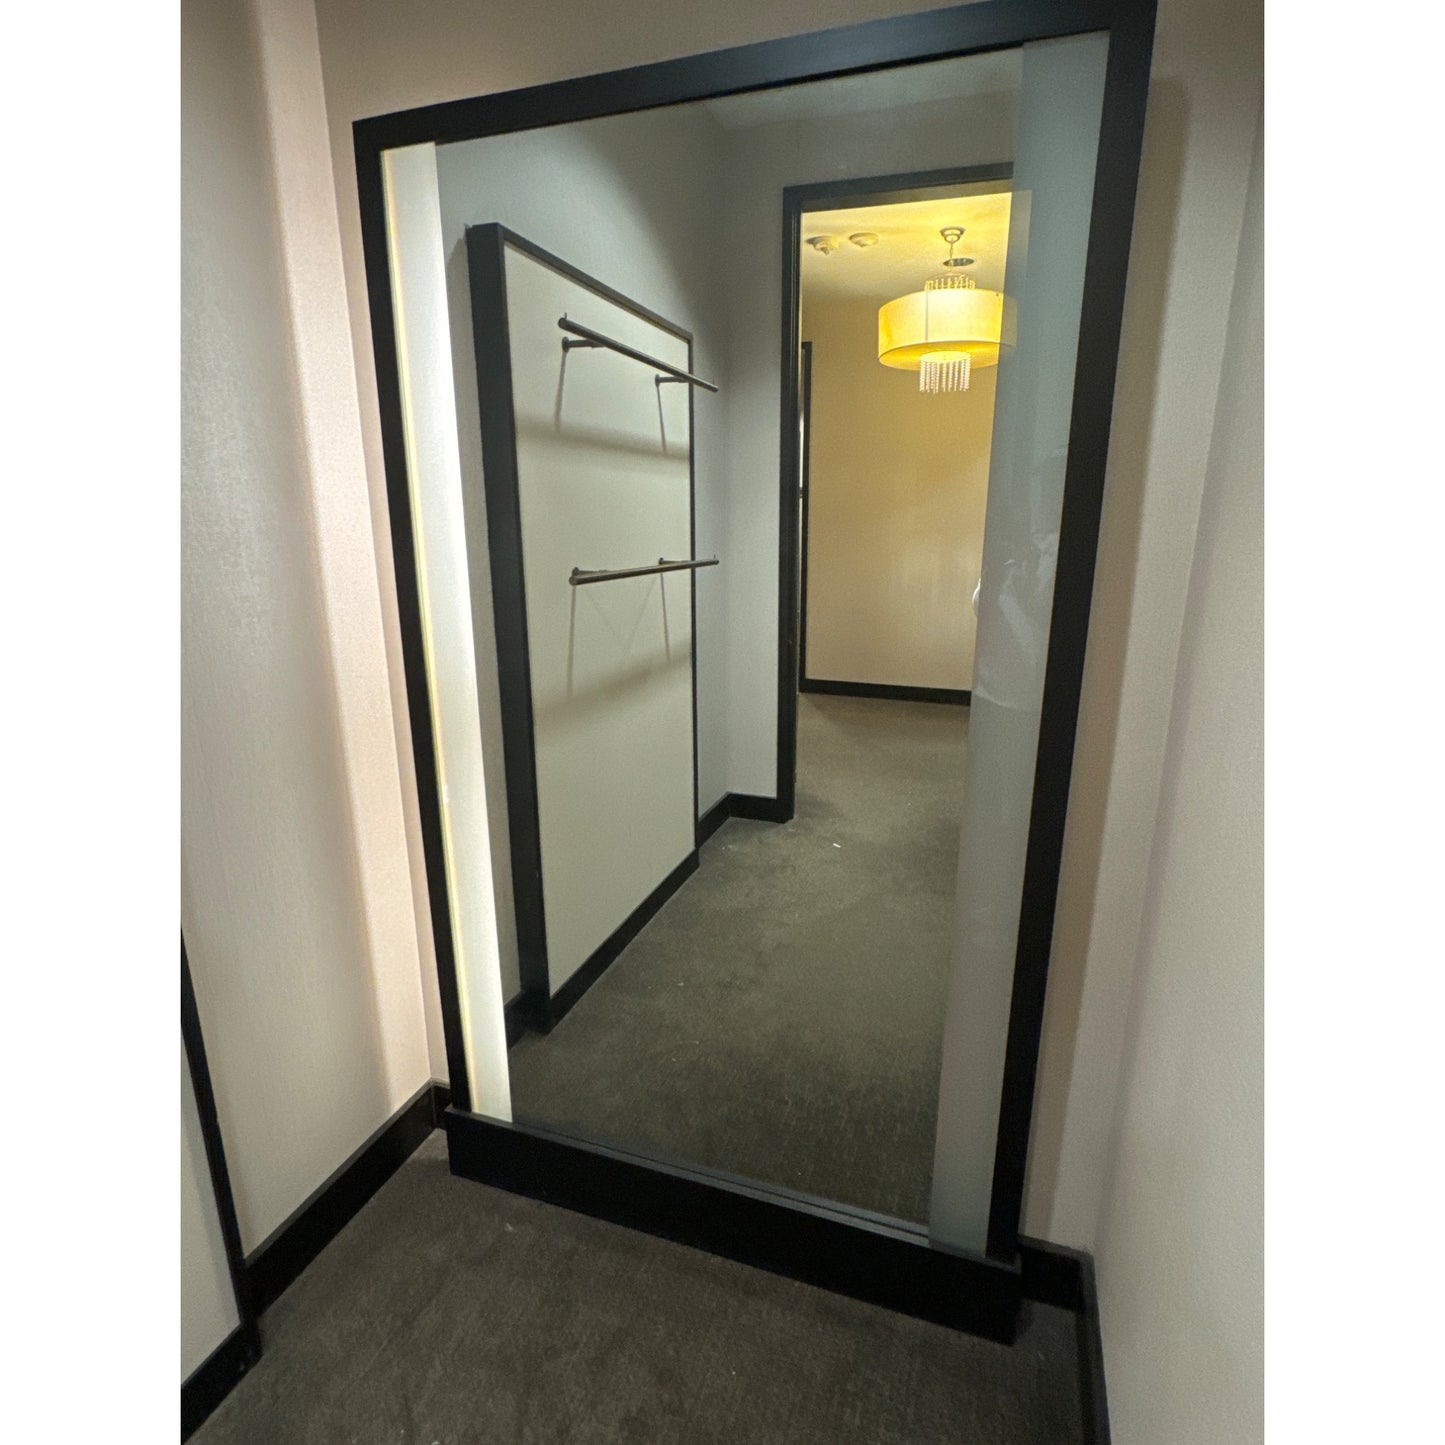 Large mirror with fluorescent lights